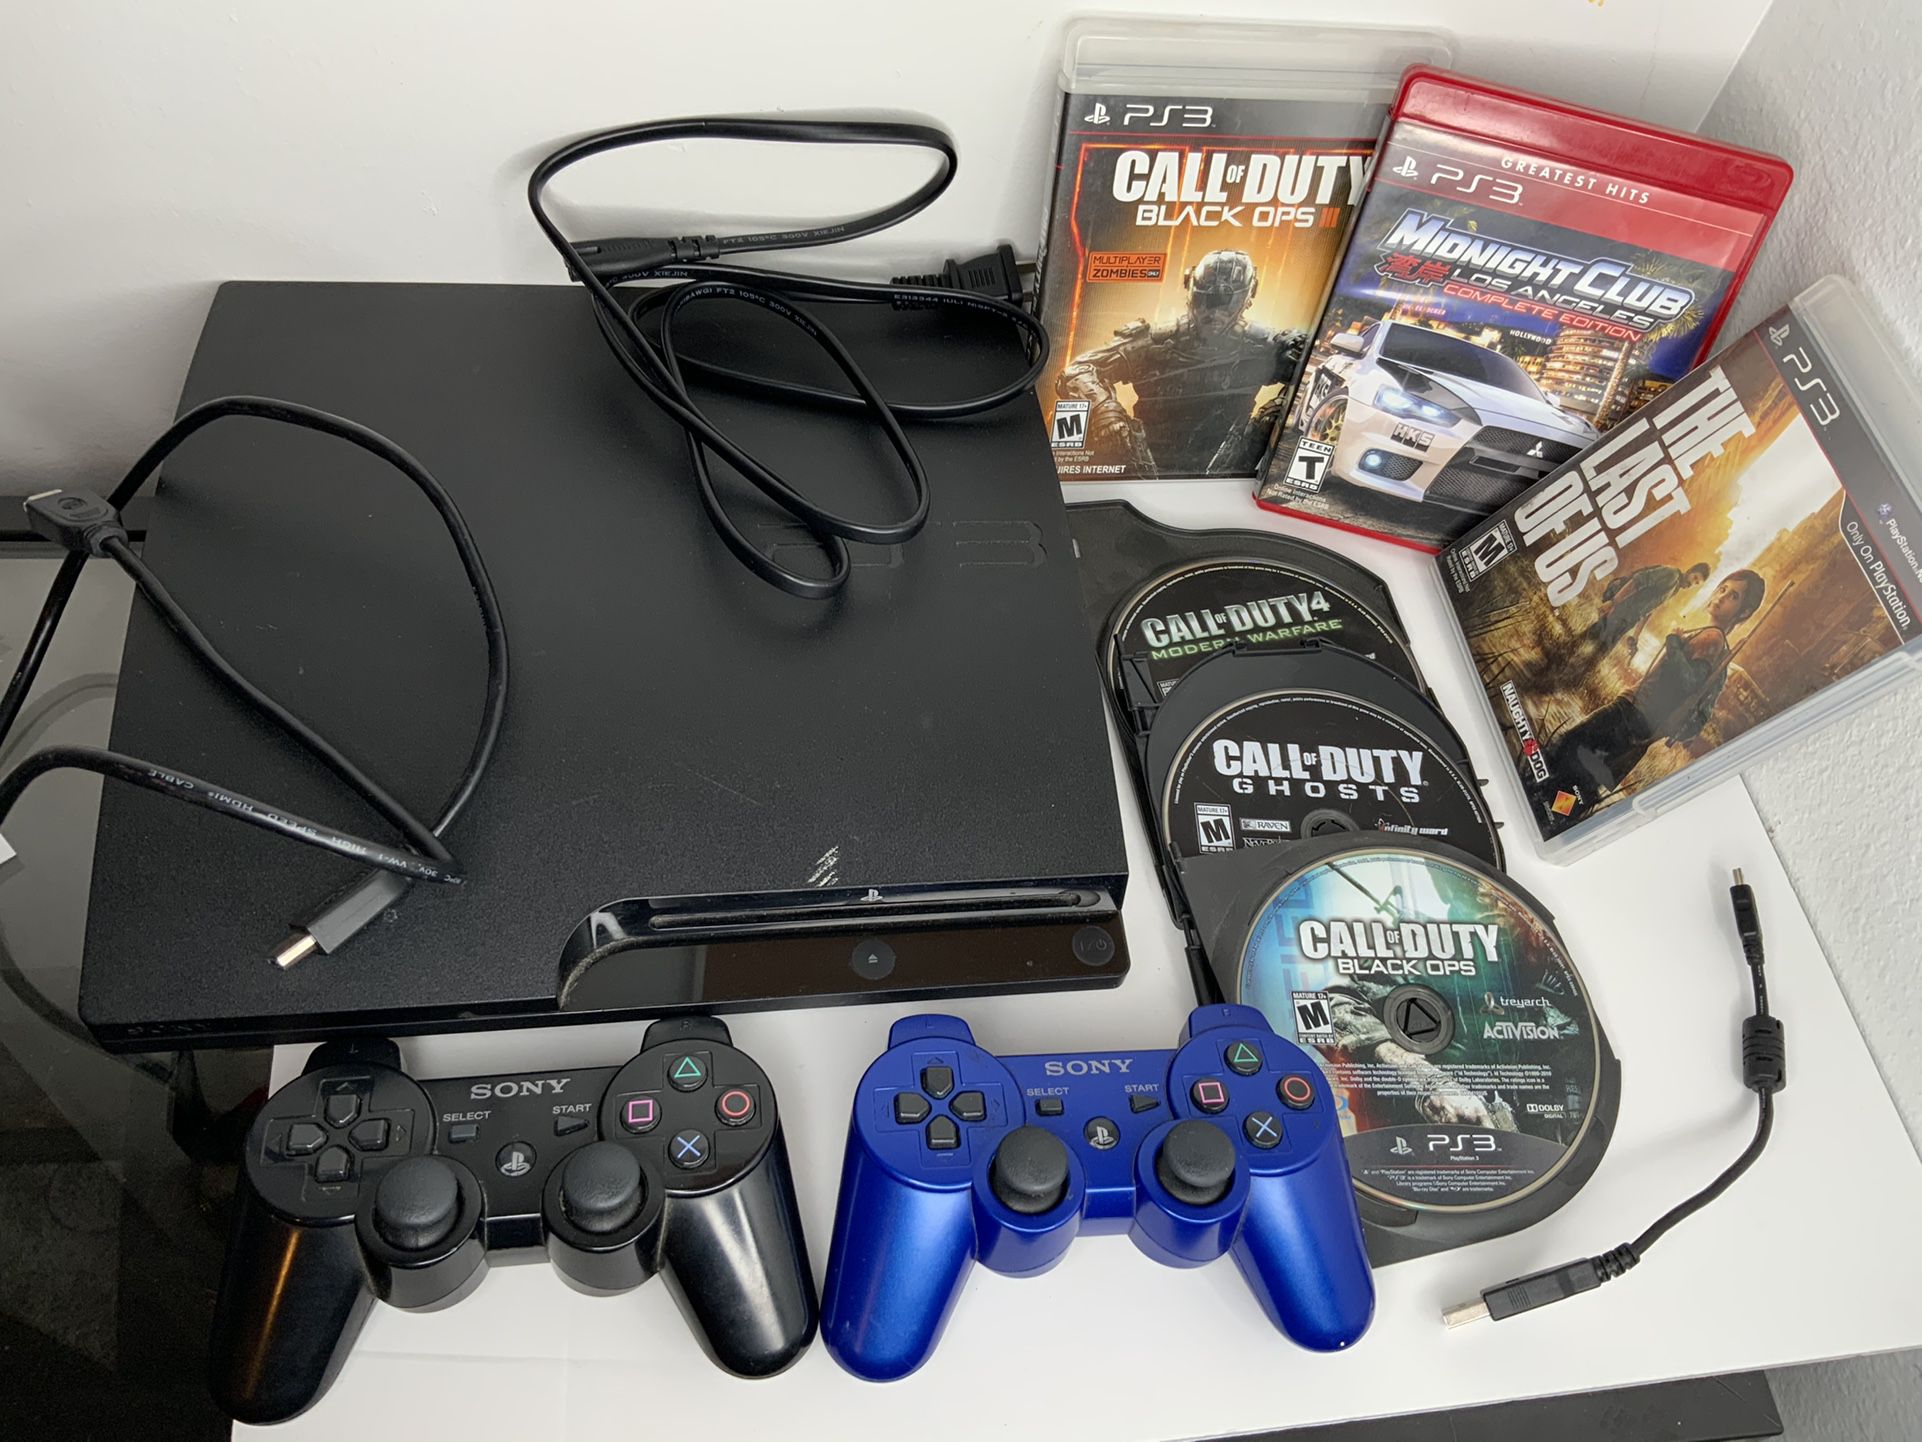 PlayStation 3 slim (PS3) Bundle, TESTED AND WORKING, playstation, 2 wireless DualShock controllers, 6 games, power cords & charger